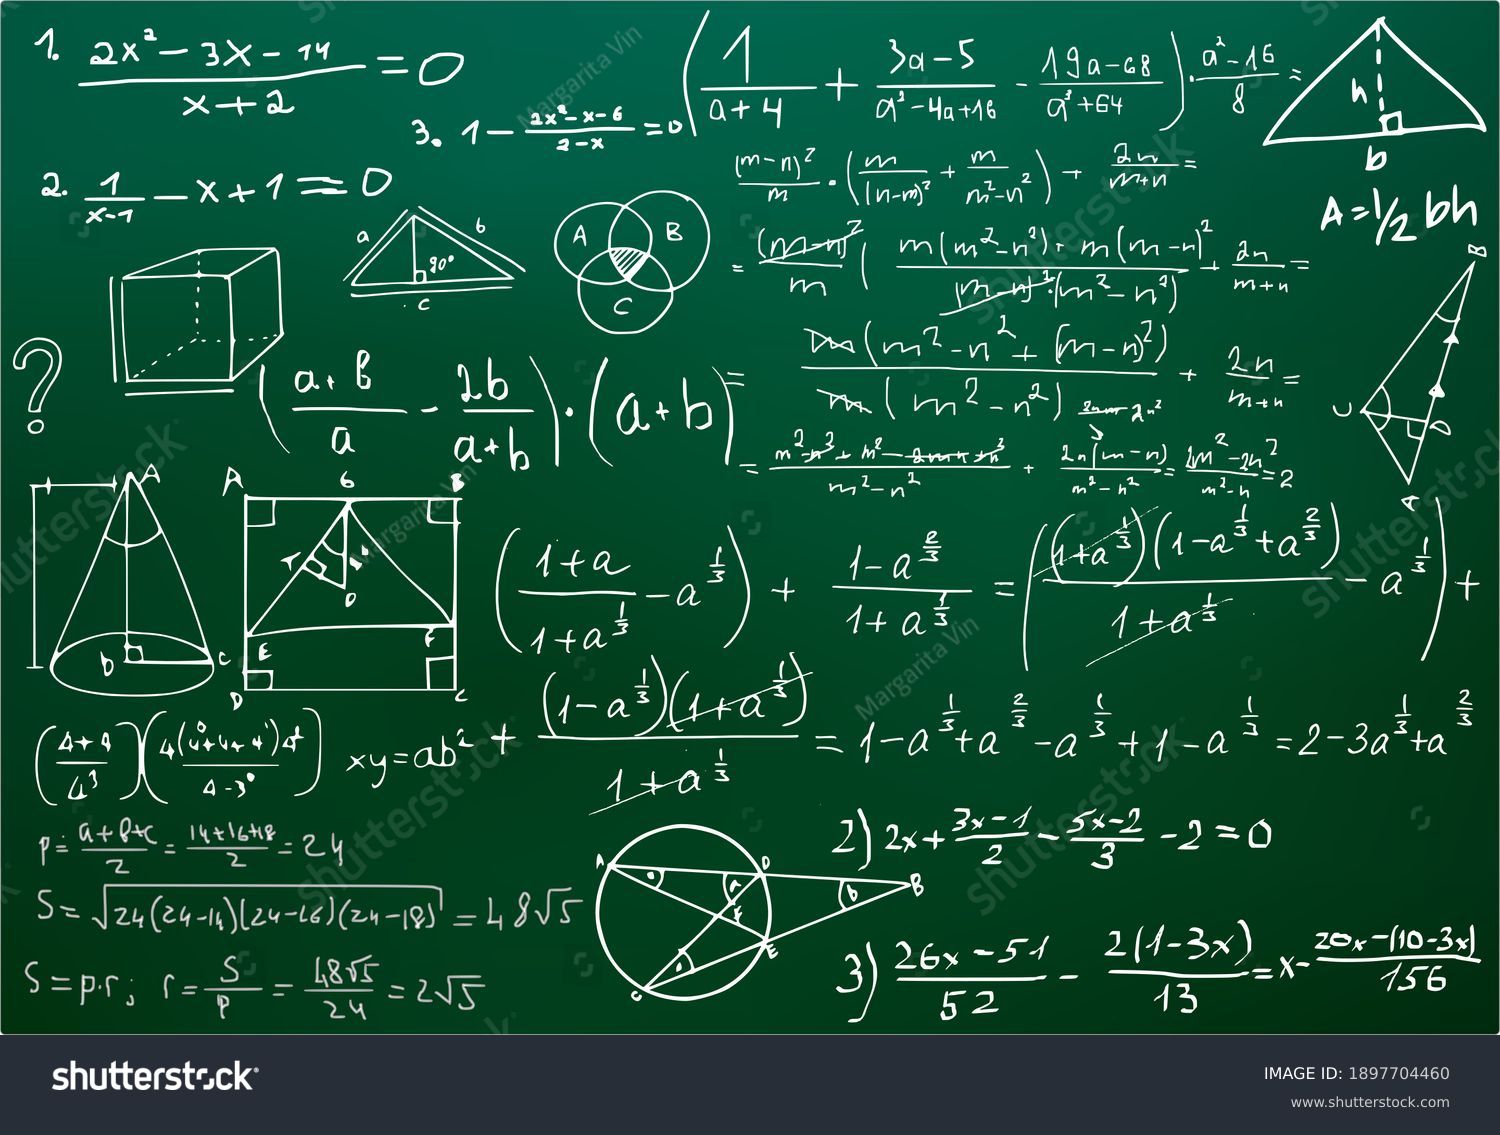 Chalk scribbles on a math board. Blackboard, formulas, shapes, geometry. The concept of education. Illustrations can be used to return to the school topic, algebra, natural sciences #1897704460